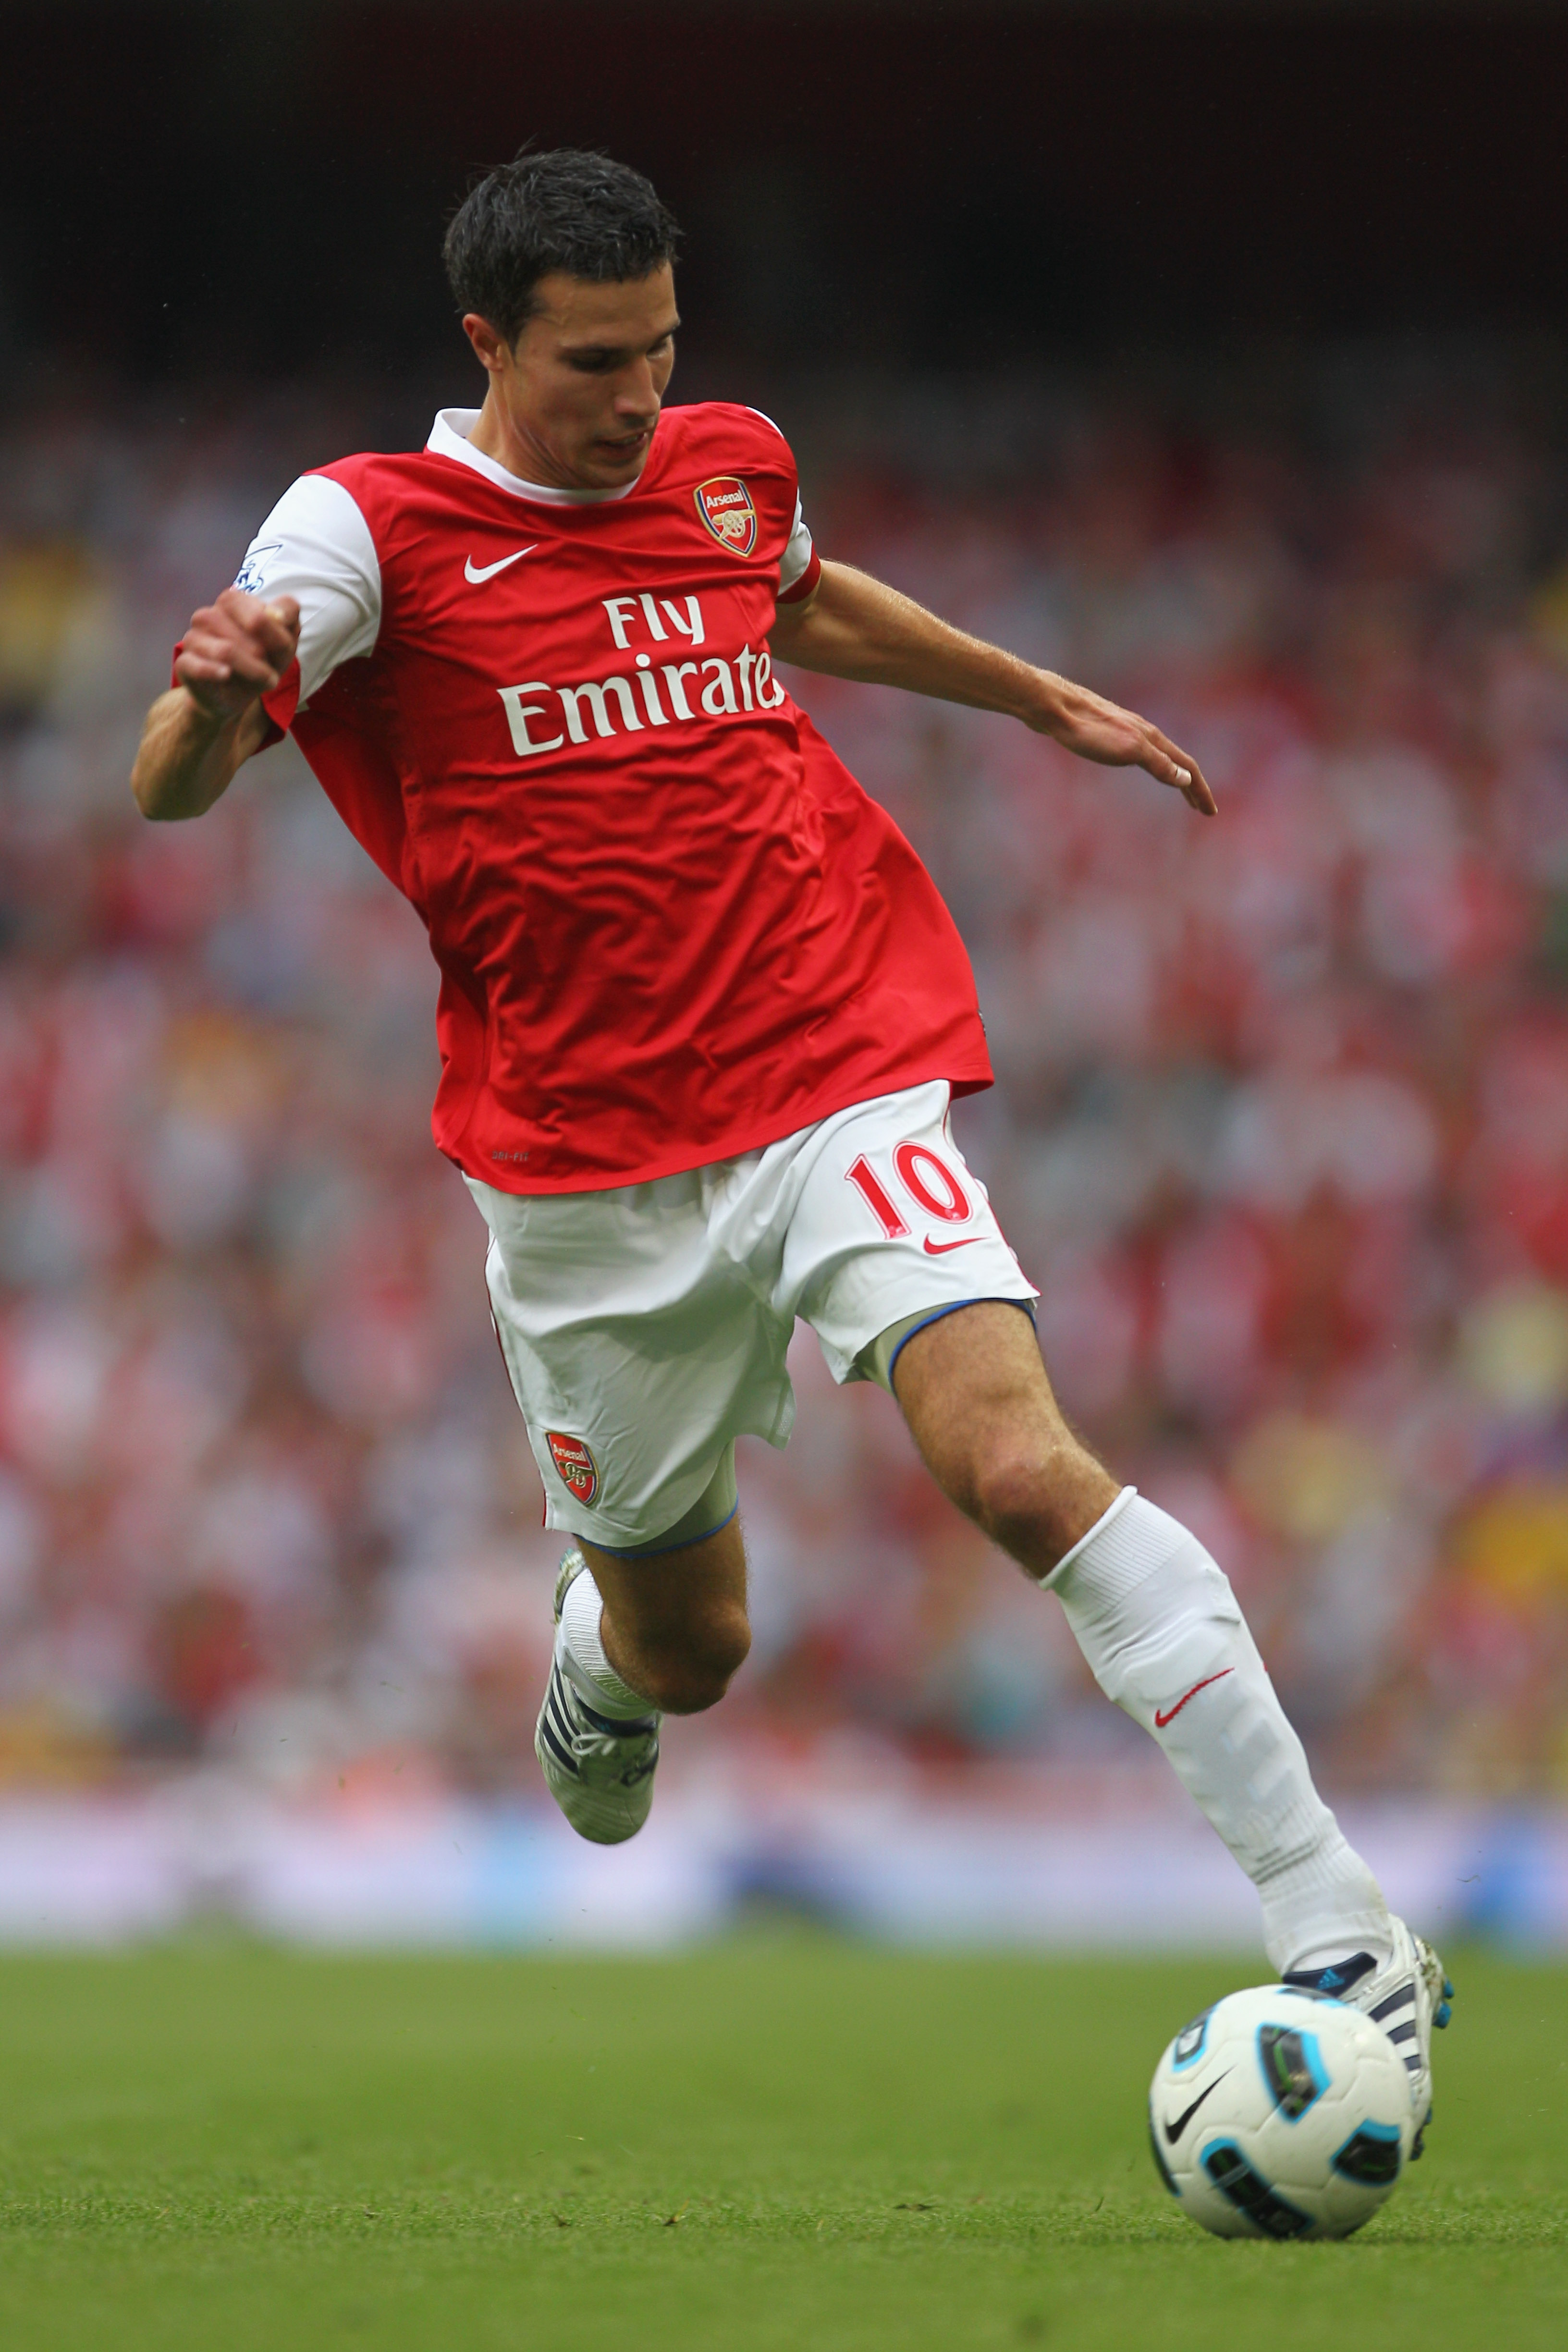 LONDON, ENGLAND - AUGUST 21:  Robin van Persie of Arsenal in action during the Barclays Premier League match between Arsenal and Blackpool at The Emirates Stadium on August 21, 2010 in London, England.  (Photo by Clive Rose/Getty Images)